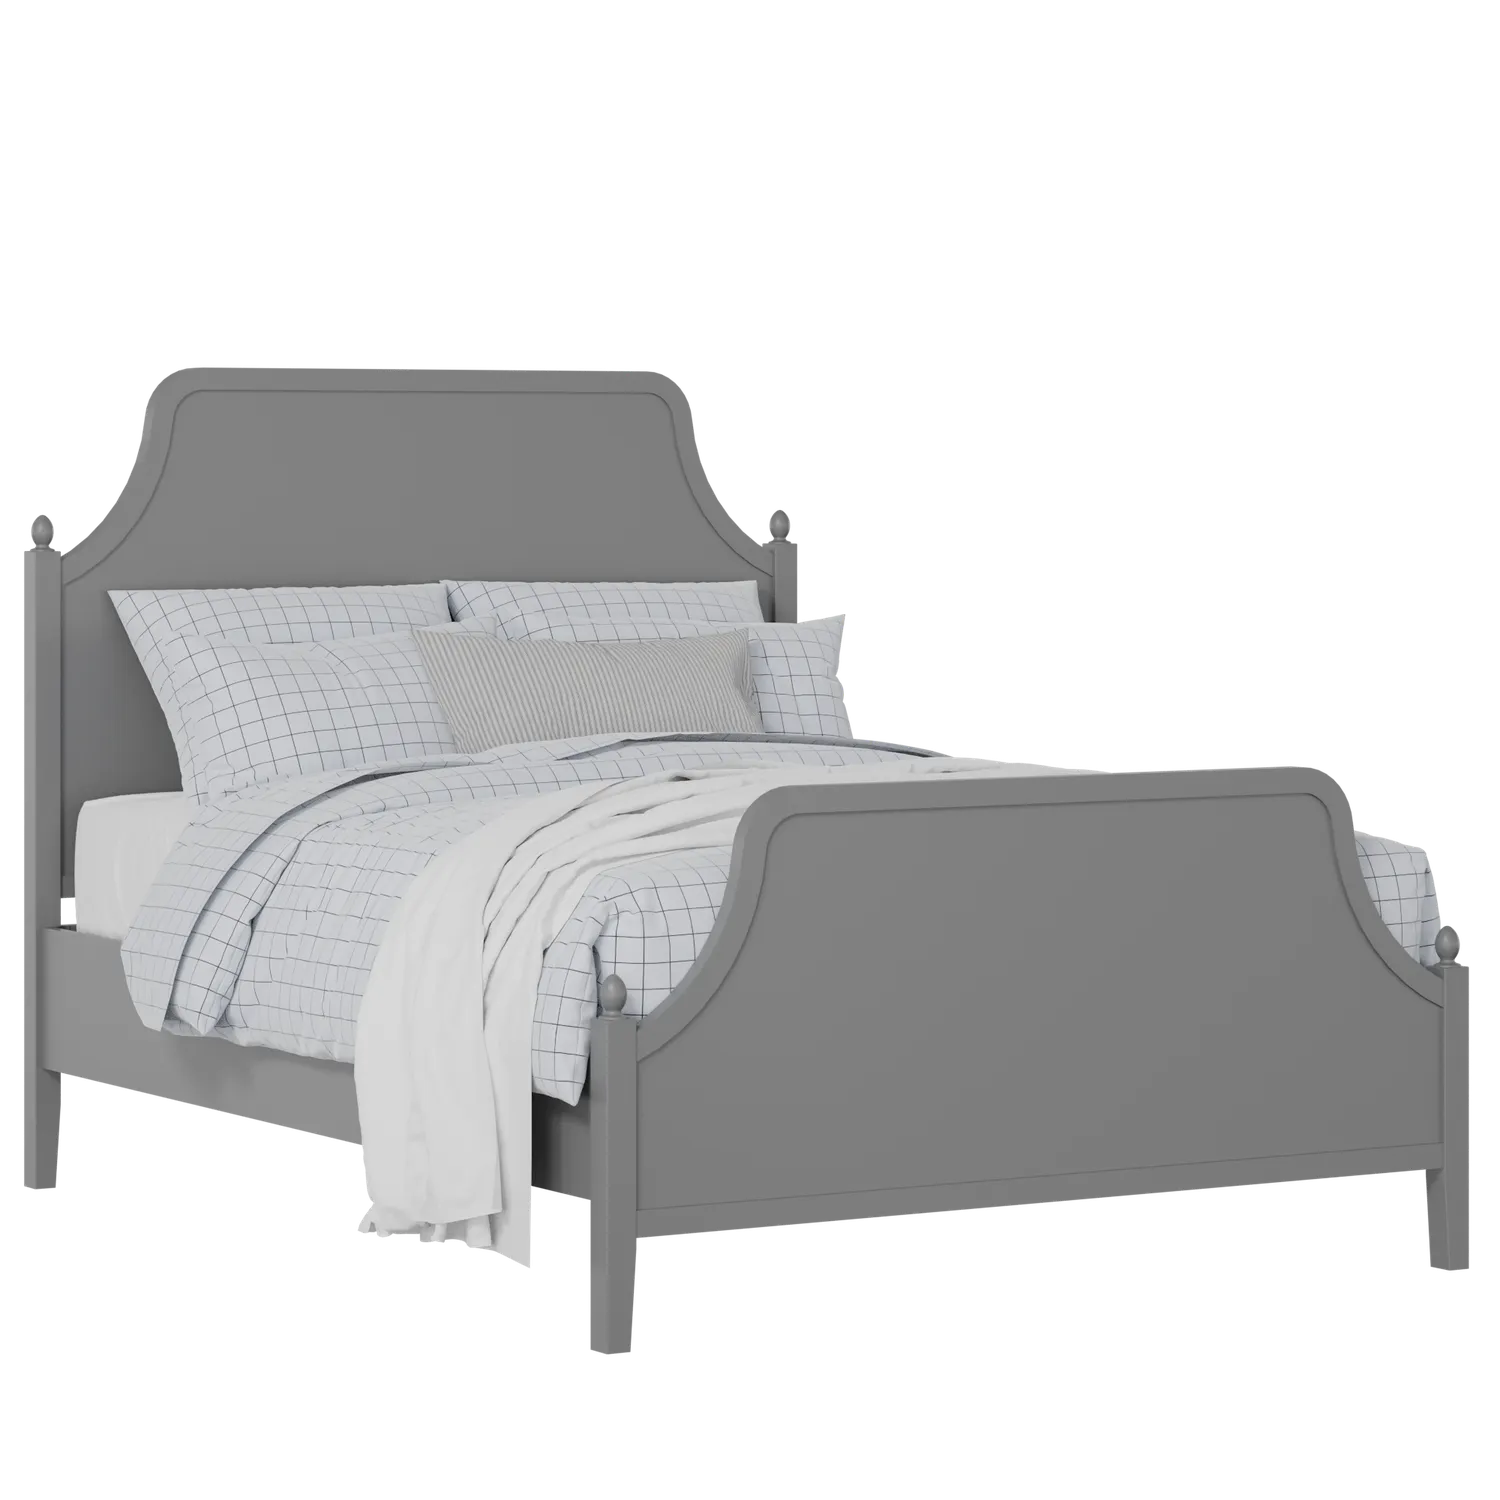 Ruskin painted wood bed in grey with Juno mattress